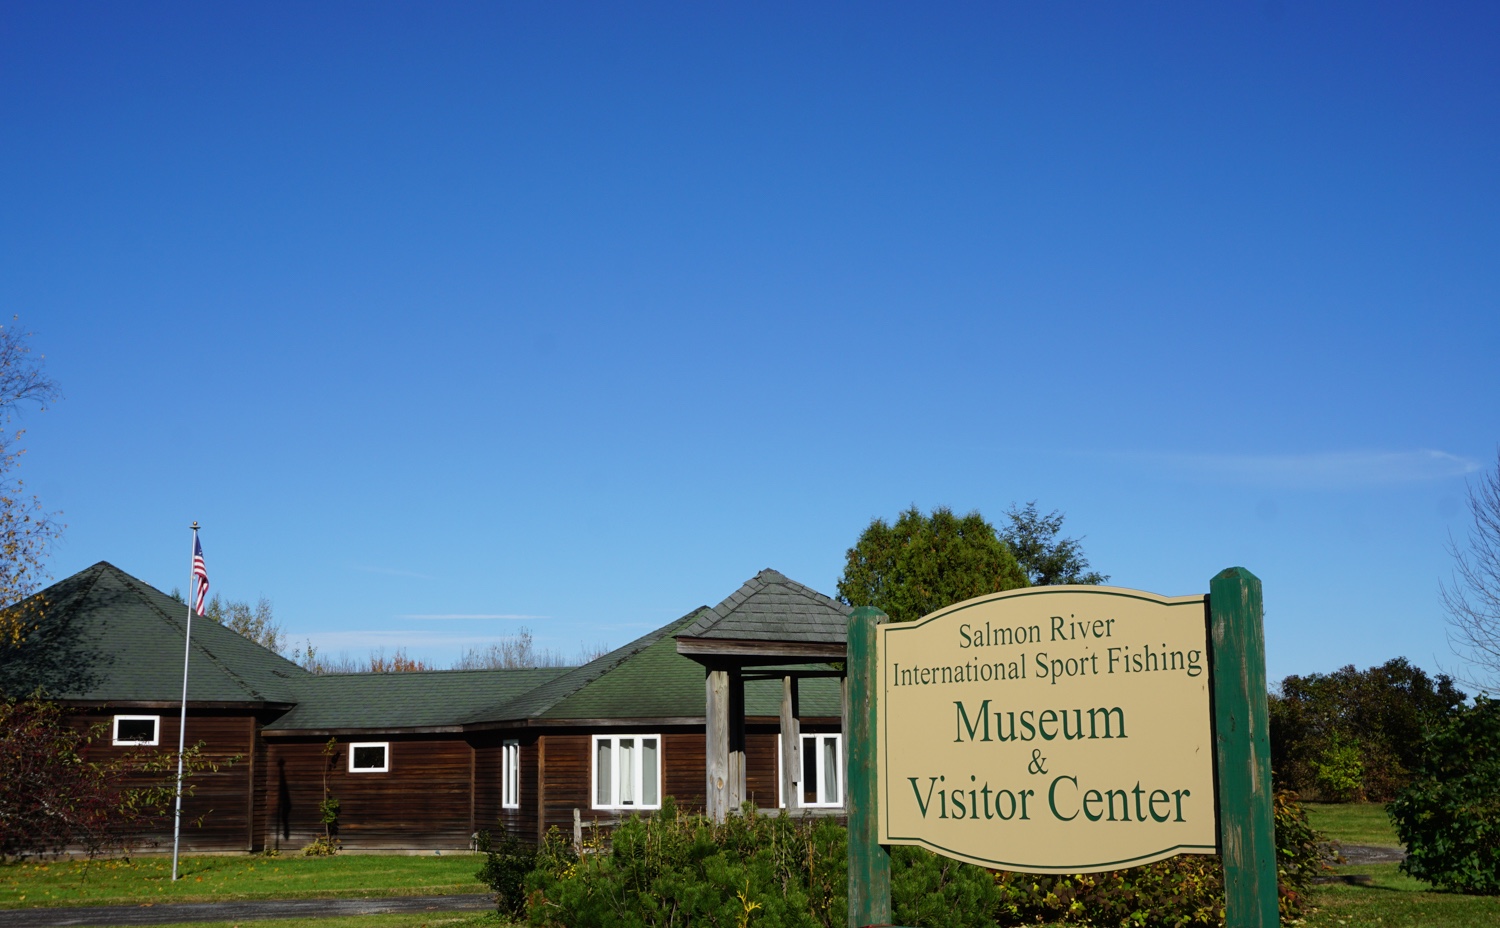 Salmon River International Sport Fishing Museum and Visitor Center - Featured Image